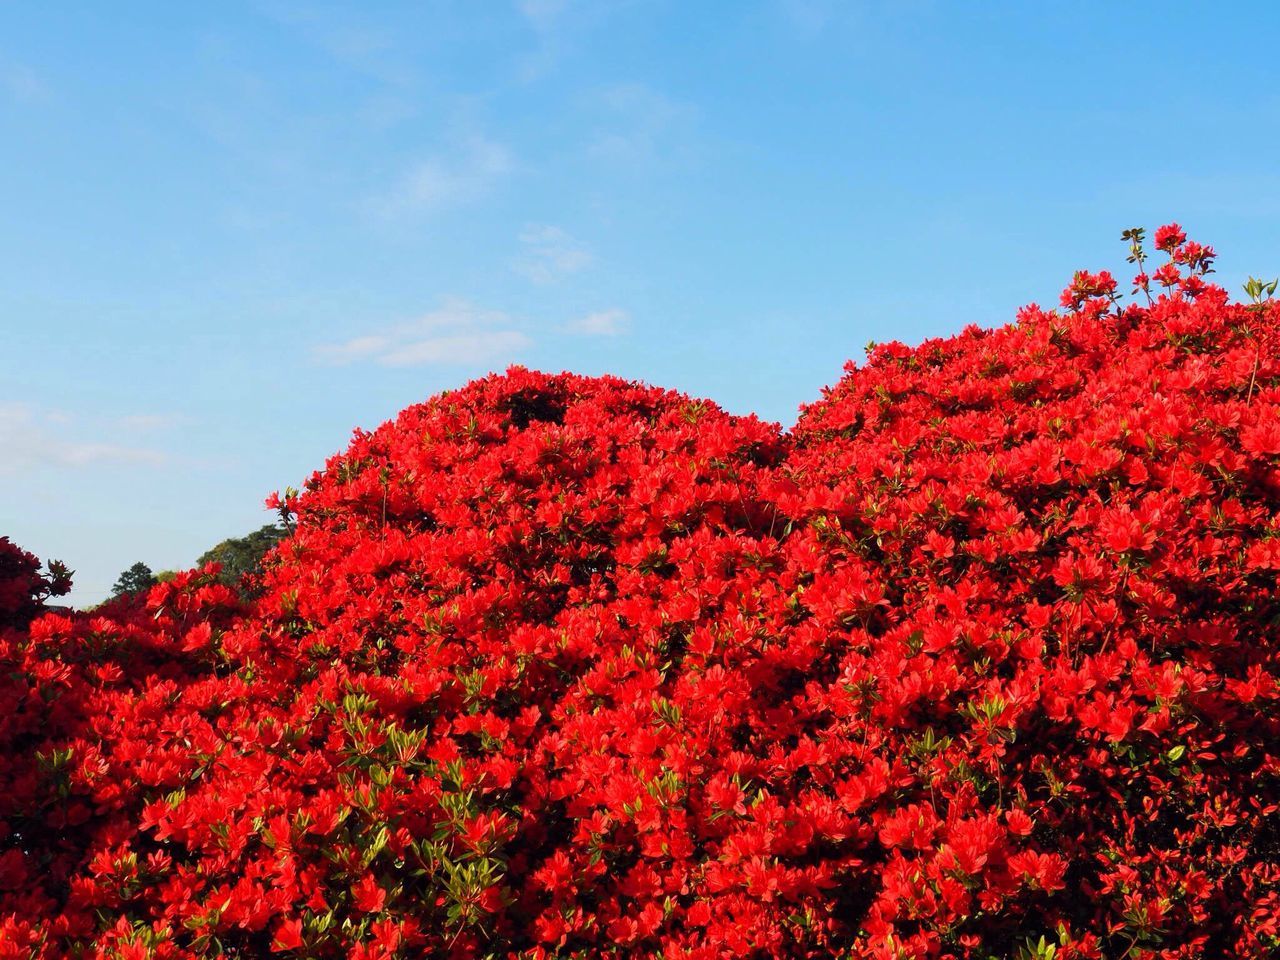 growth, red, freshness, nature, beauty in nature, flower, low angle view, no people, fragility, tree, sky, outdoors, day